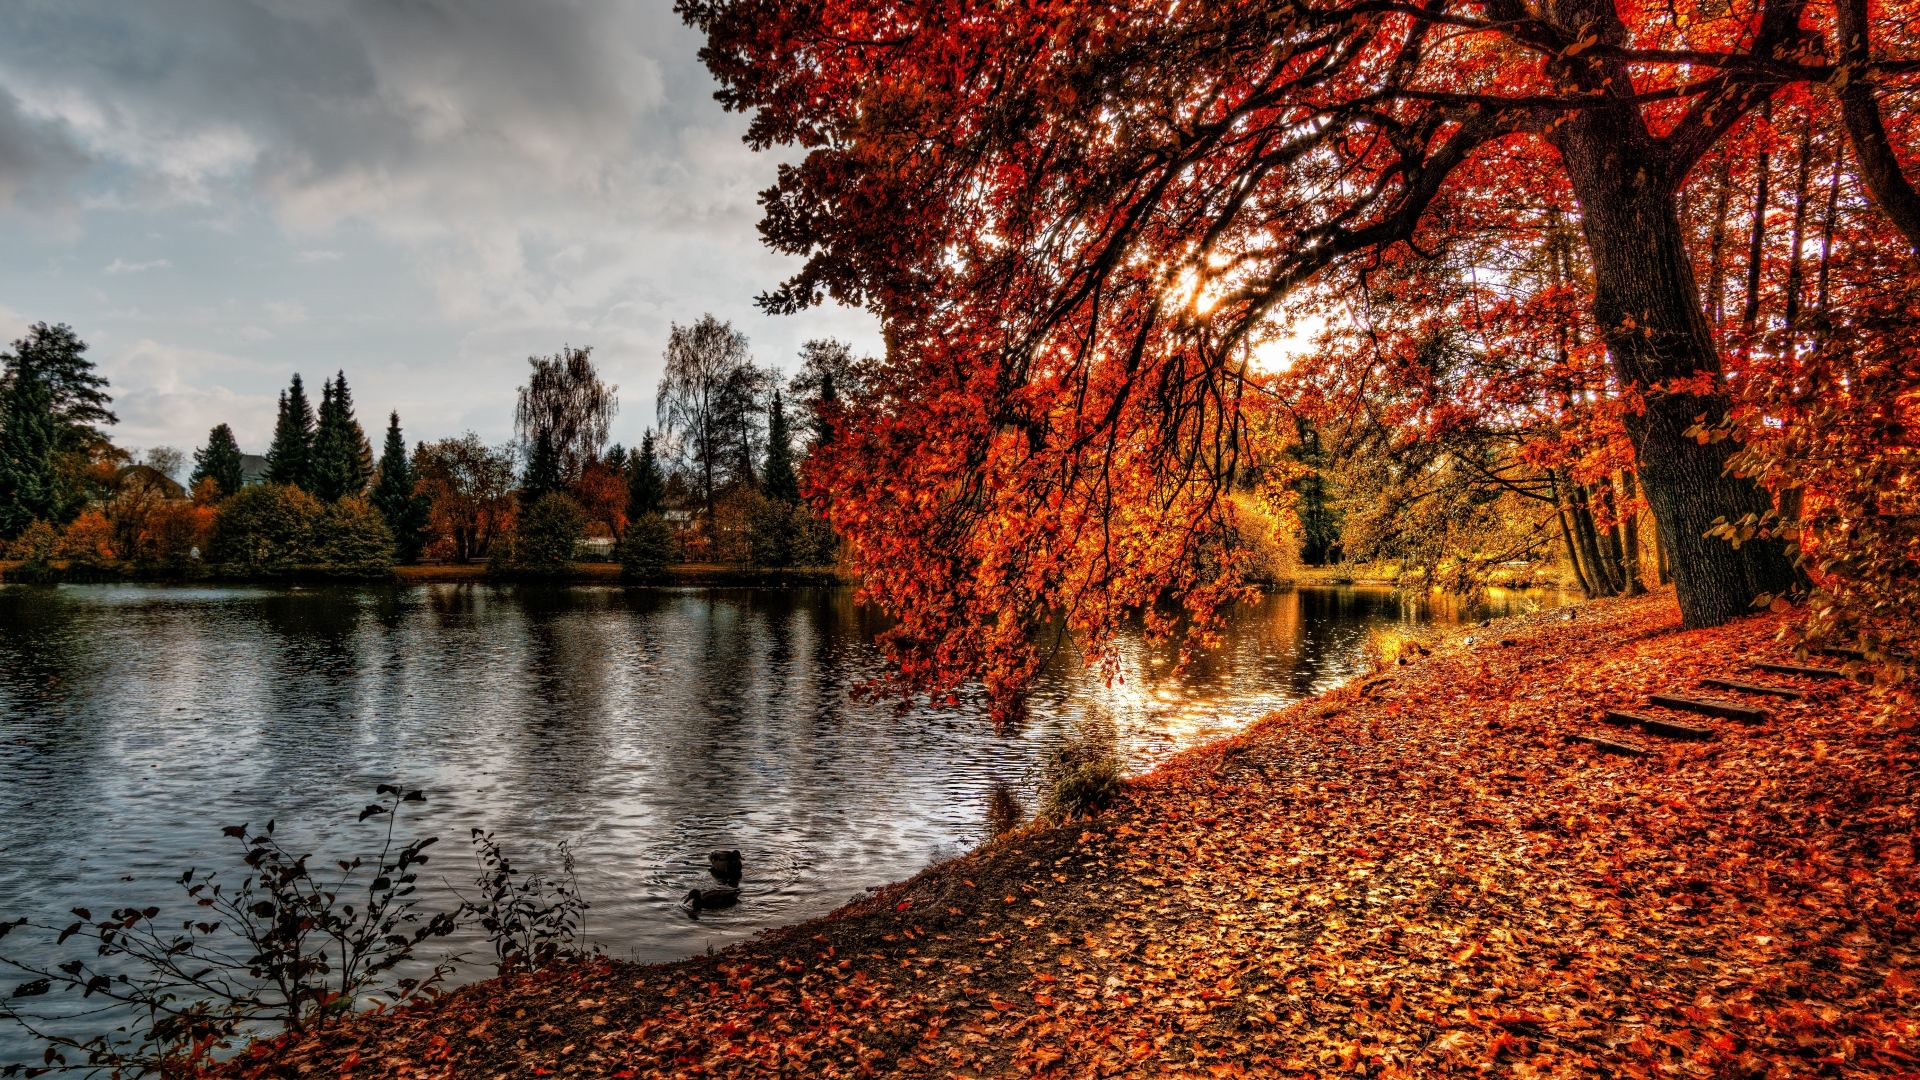 Autumn Forest By Lake - HD Wallpaper 